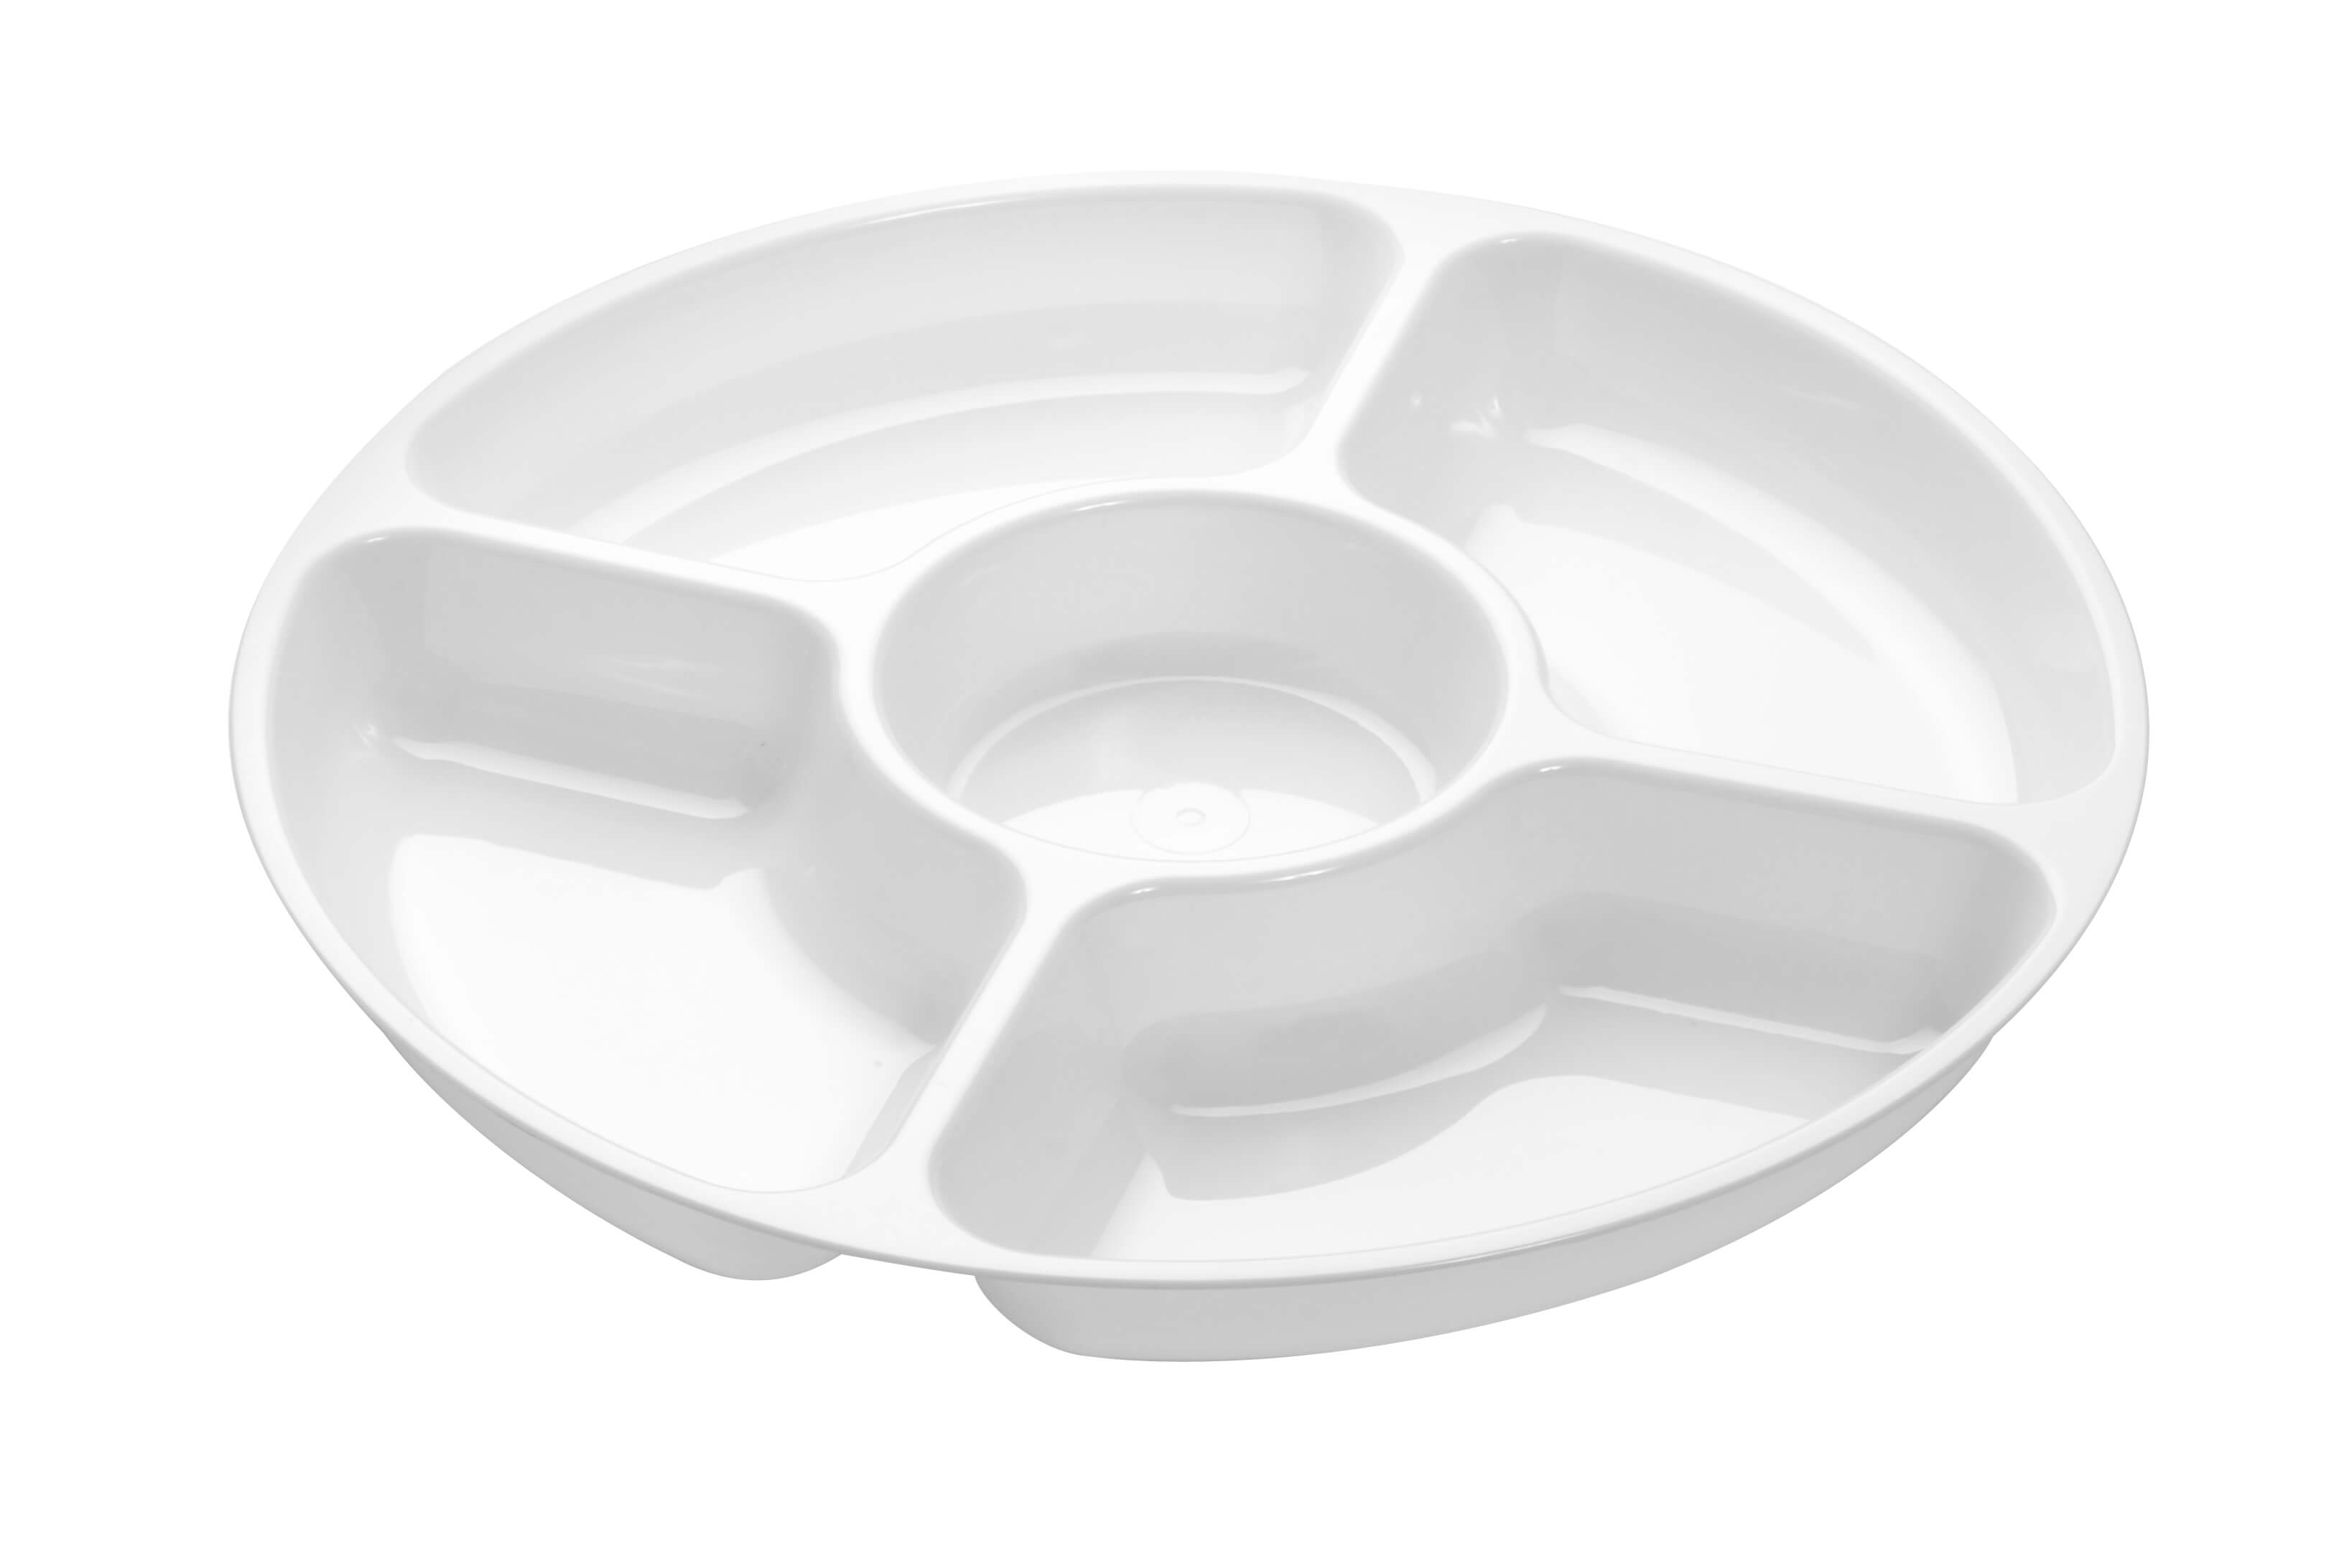 White 7 Compartment Plate with Lid